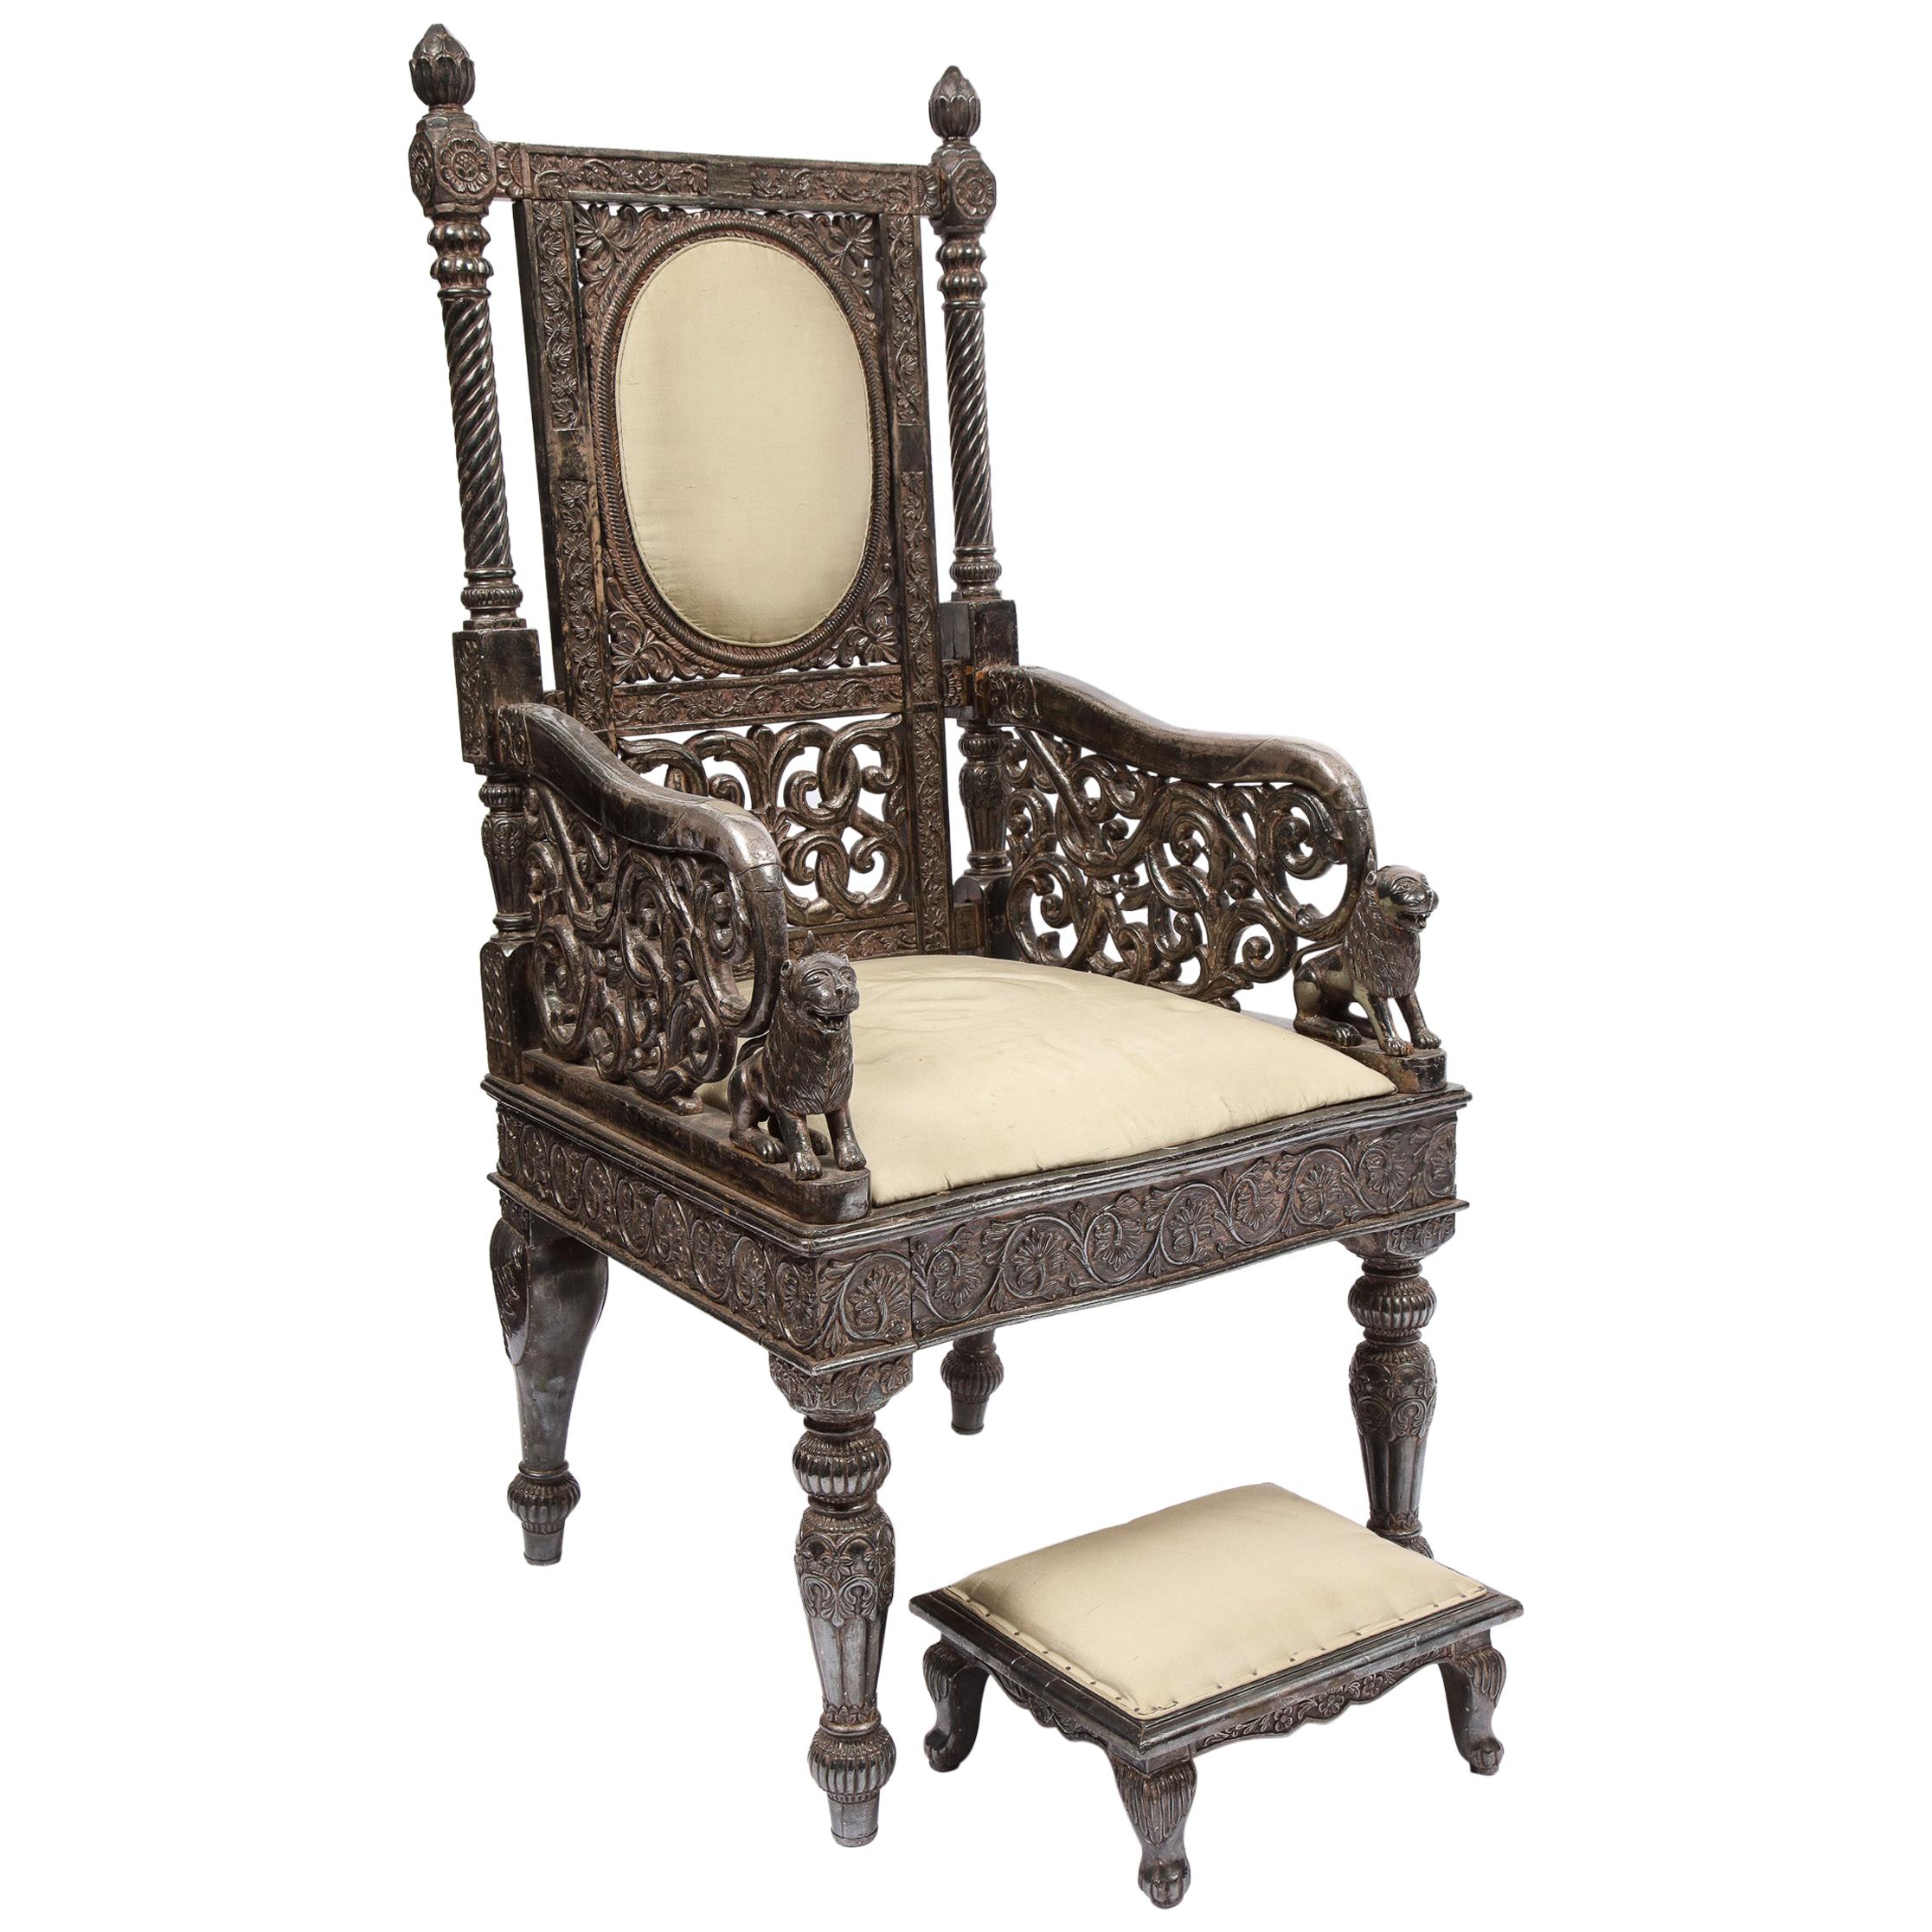 Indian Mogul Style Silver-Clad Gilded Ceremonial Throne Chair for the Maharajah